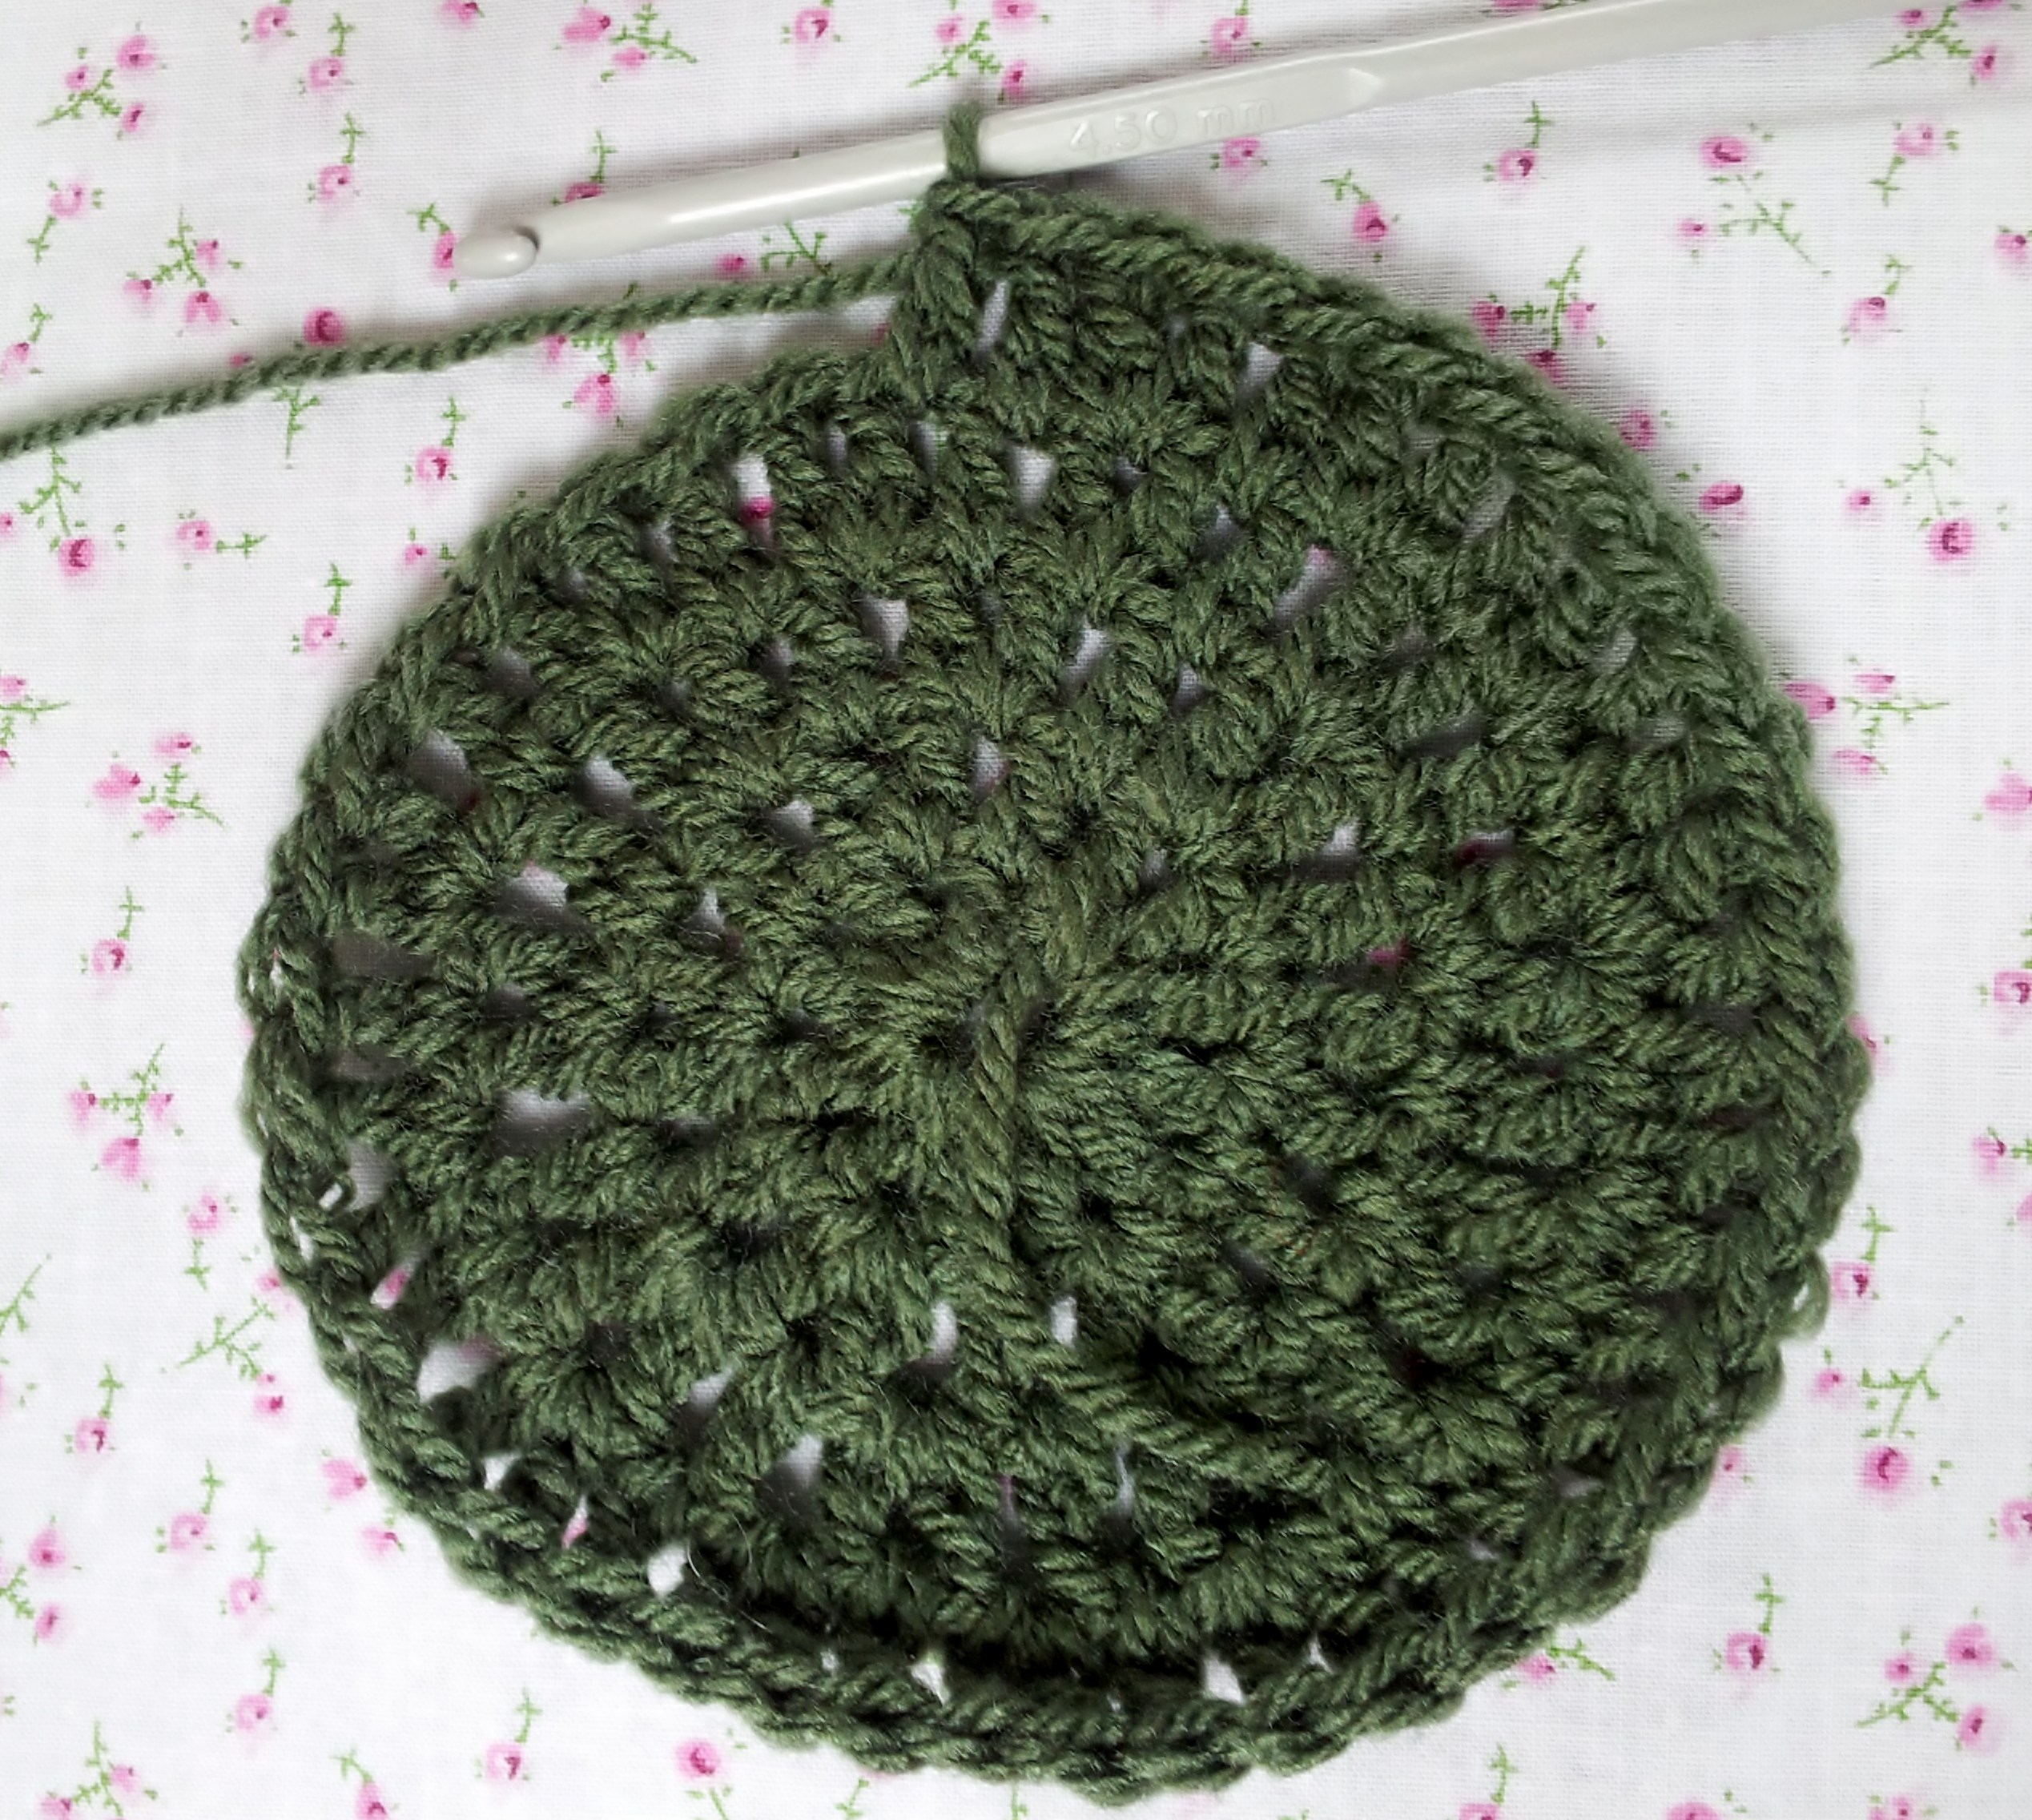 Simple Crochet Hat Pattern How To Make A Simple Crochet Hat Free Pattern Thestitchsharer